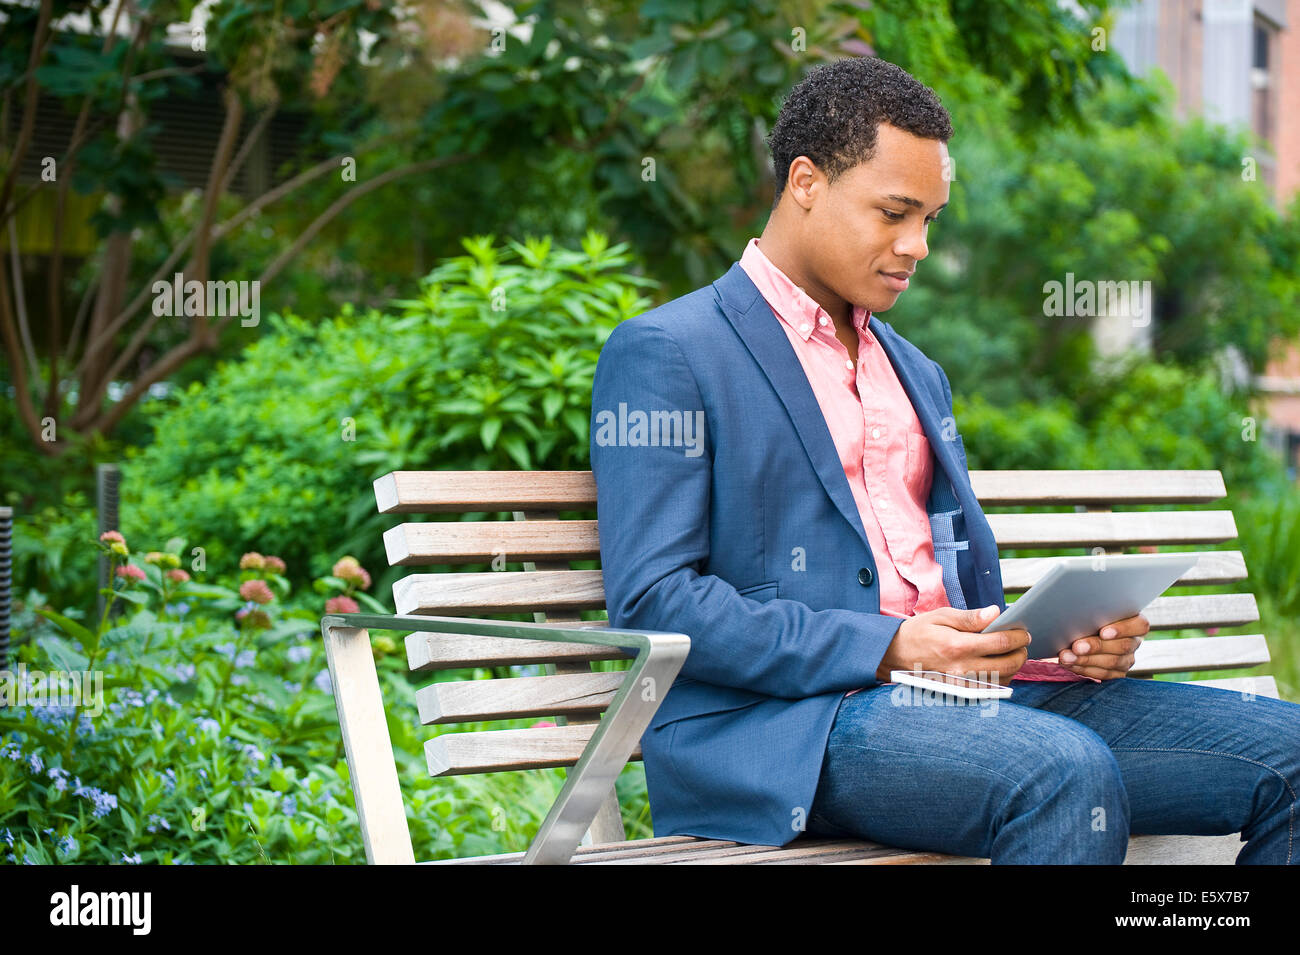 Young businessman sitting on park bench looking at digital tablet Banque D'Images